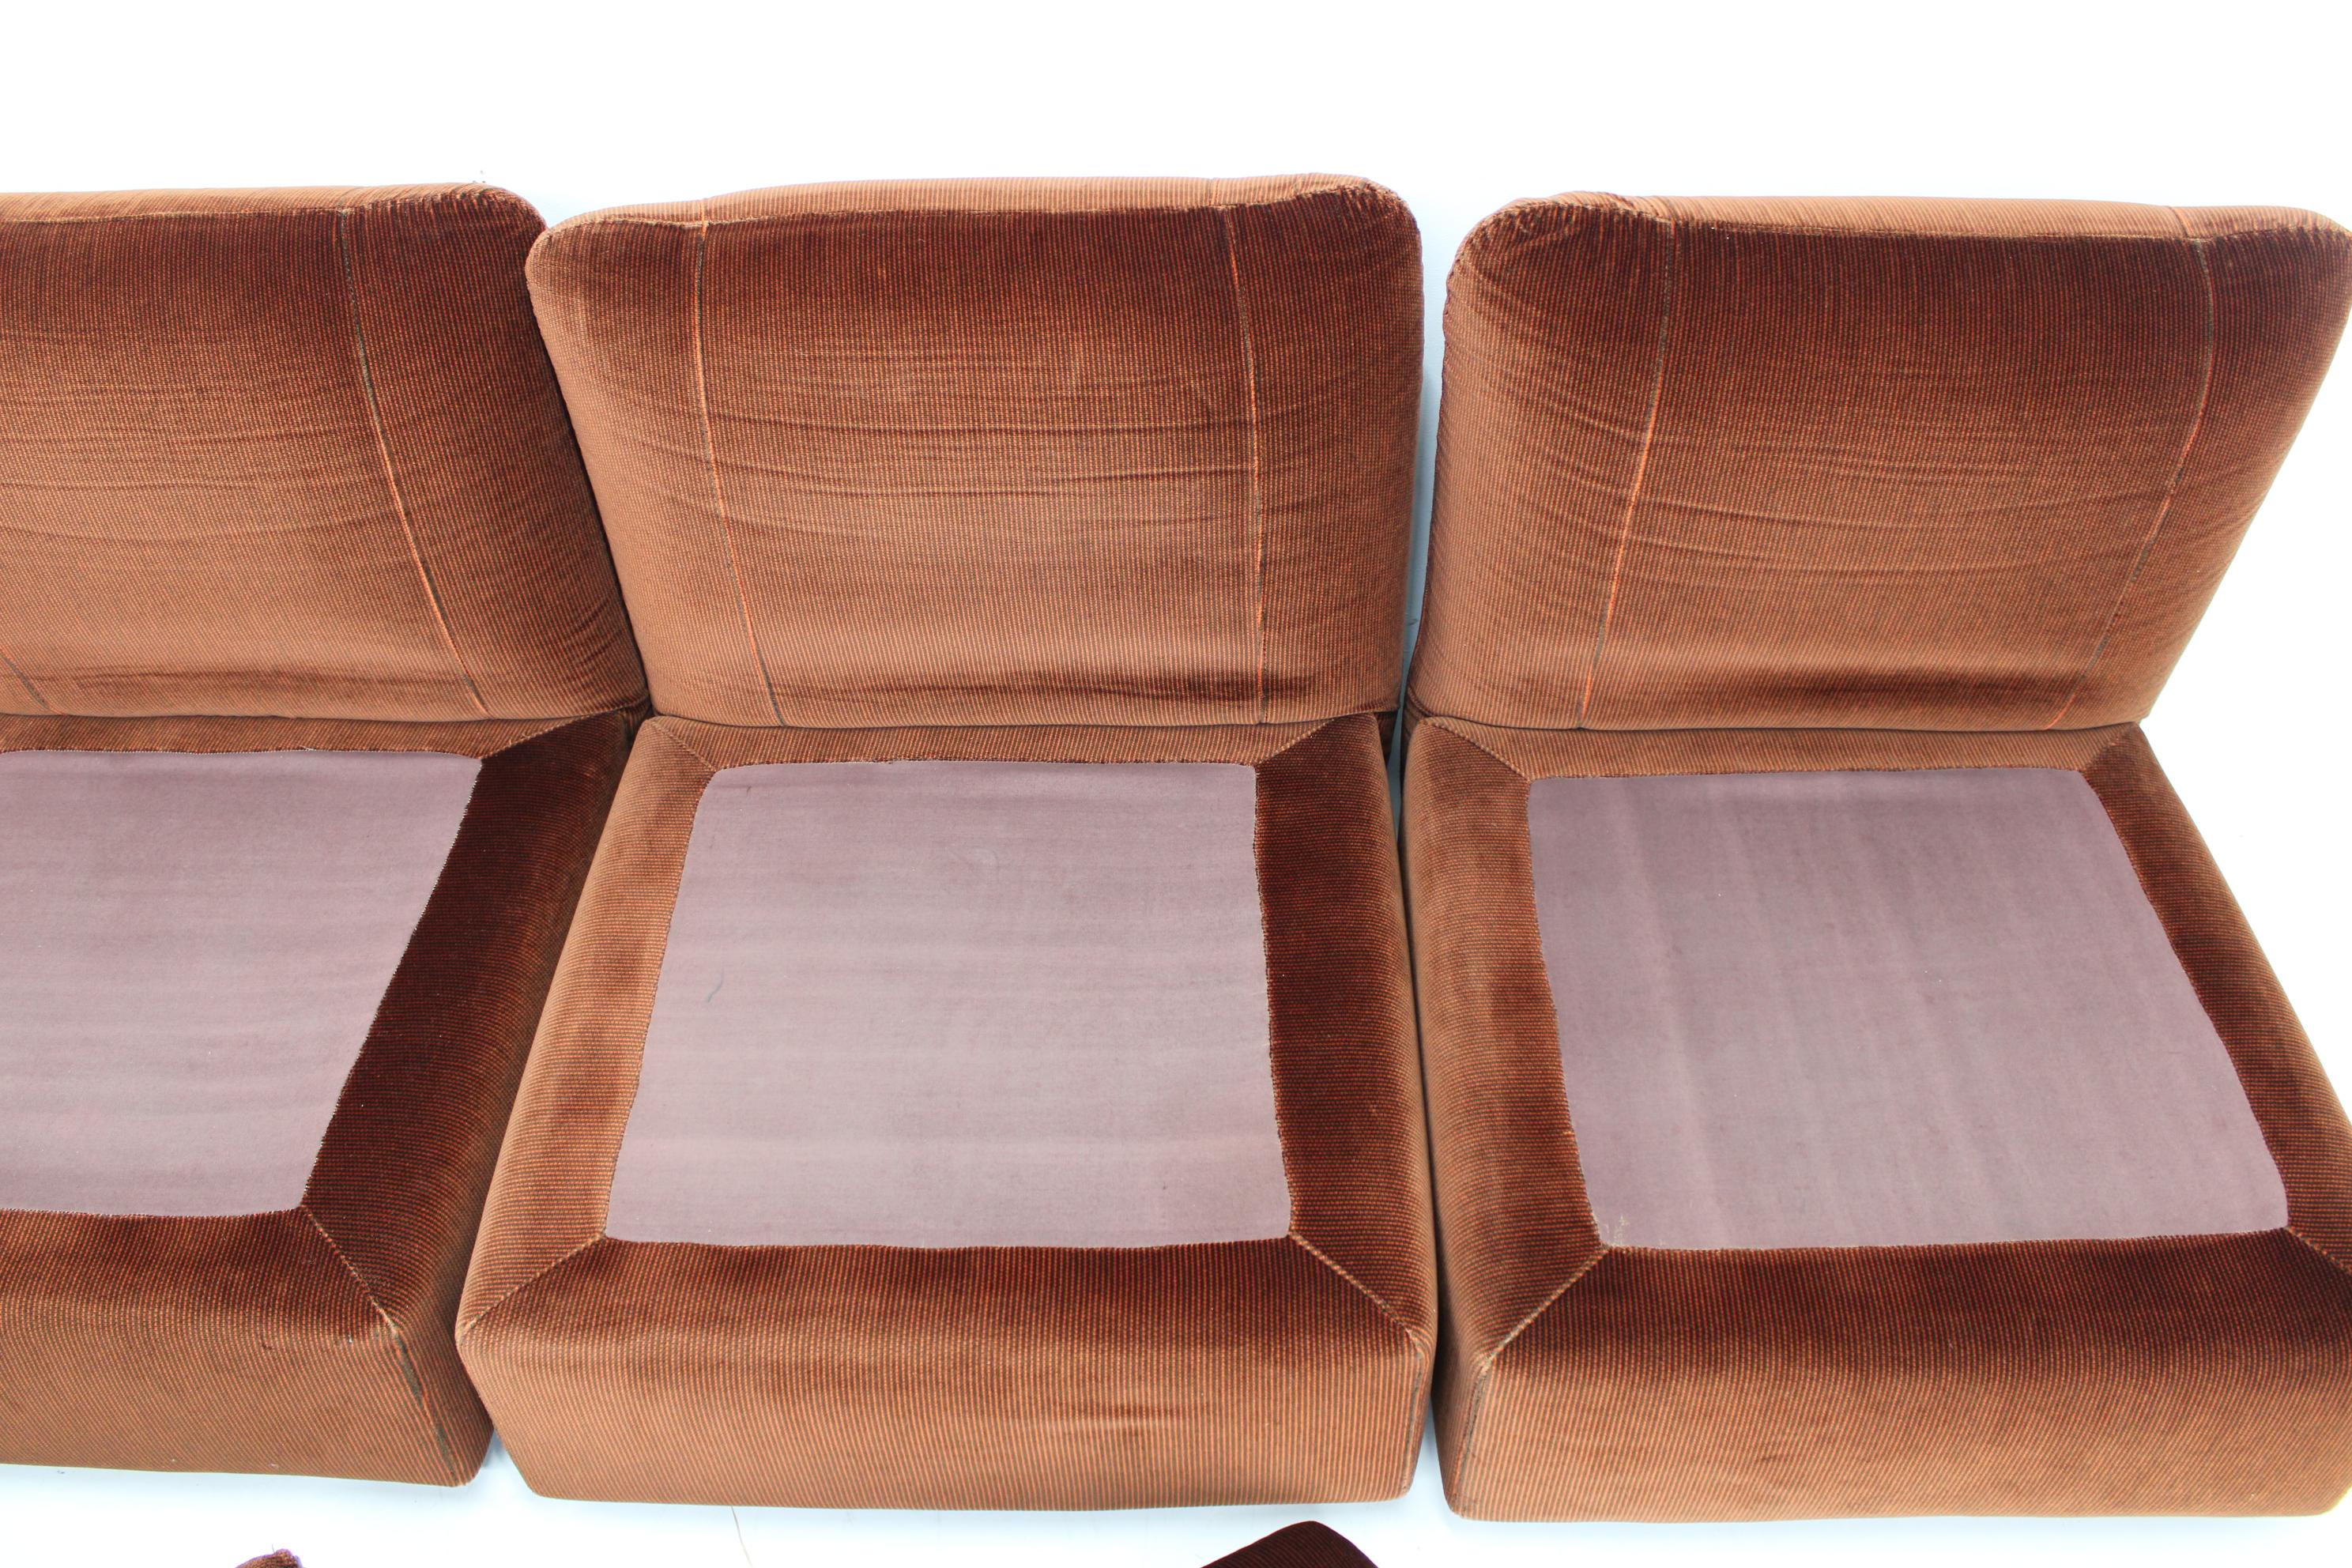 Late 20th Century 1970s Modular Sofa or Chairs, Italy